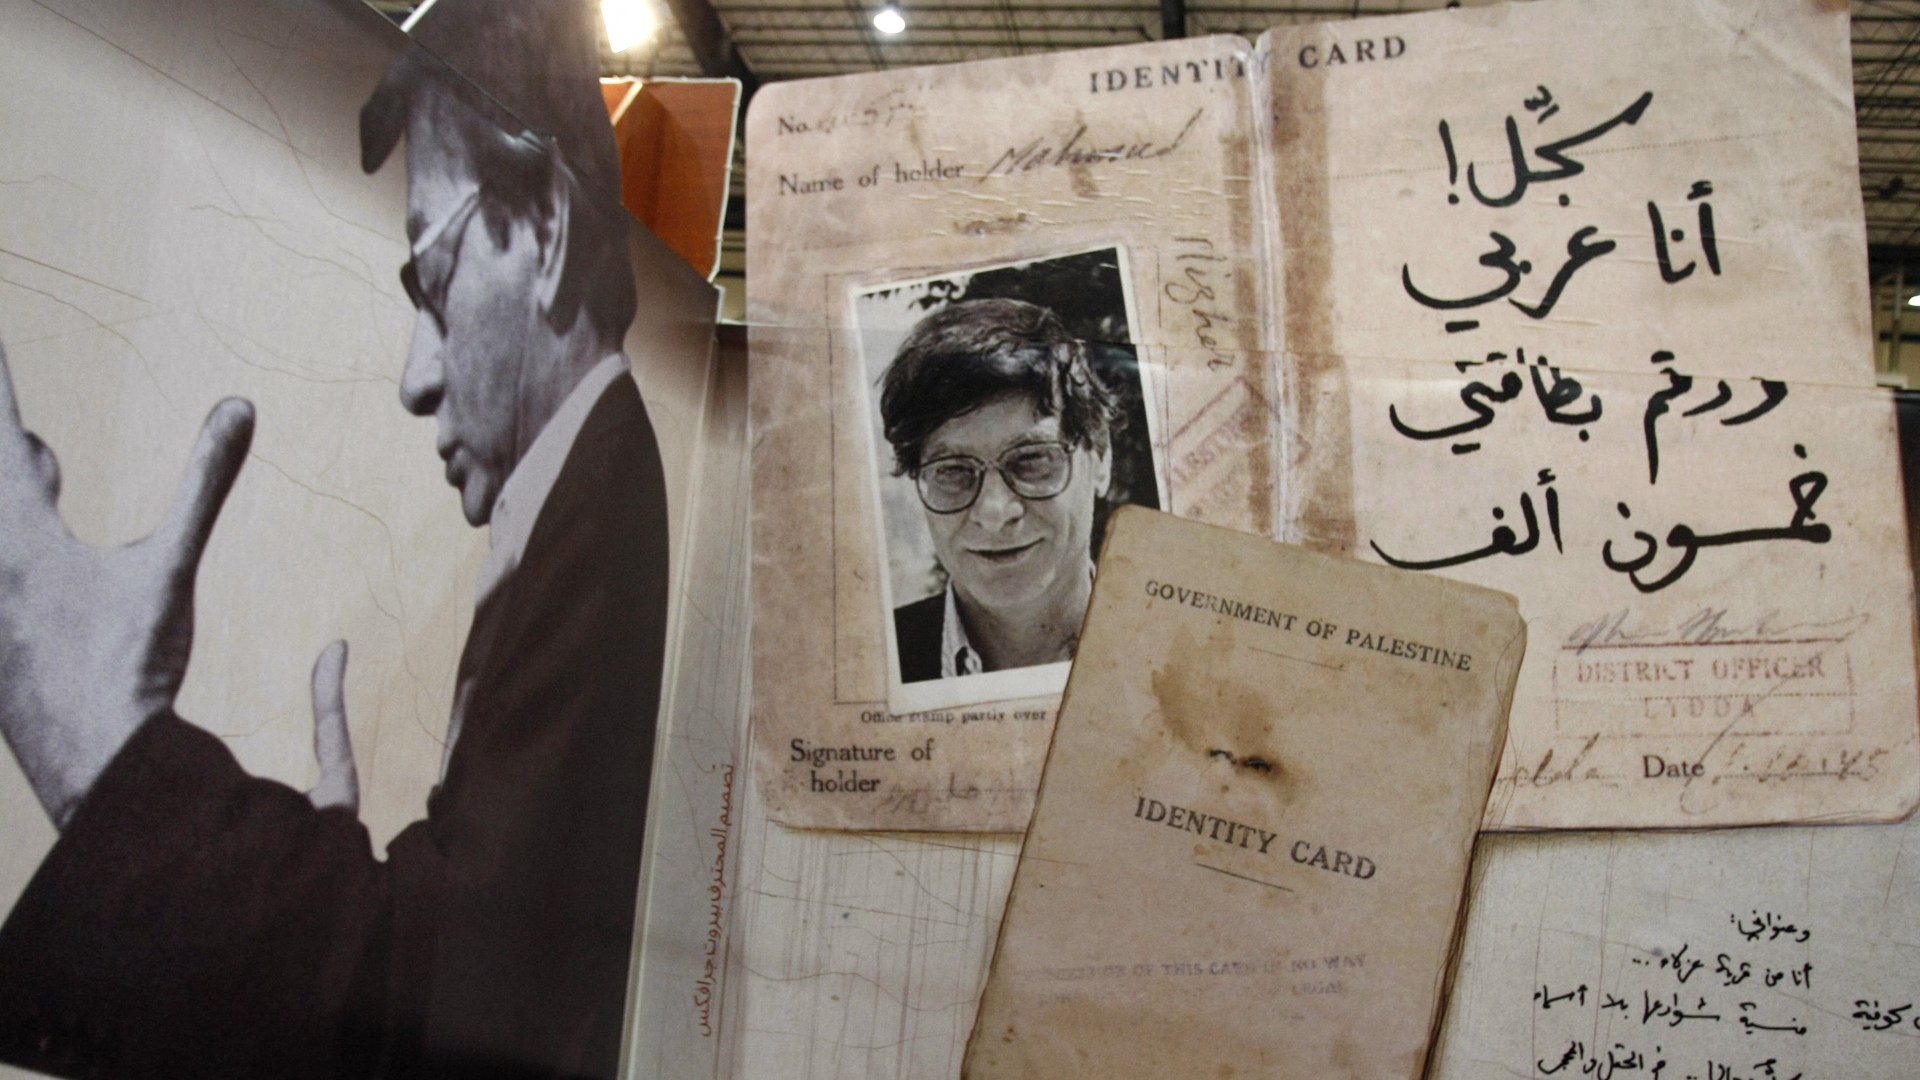 Homage to late Palestinian poet Mahmud Darwish (pictures) is erected during the 52nd Arab and International Beirut Book Fair in the Lebanese capital on November 28, 2008